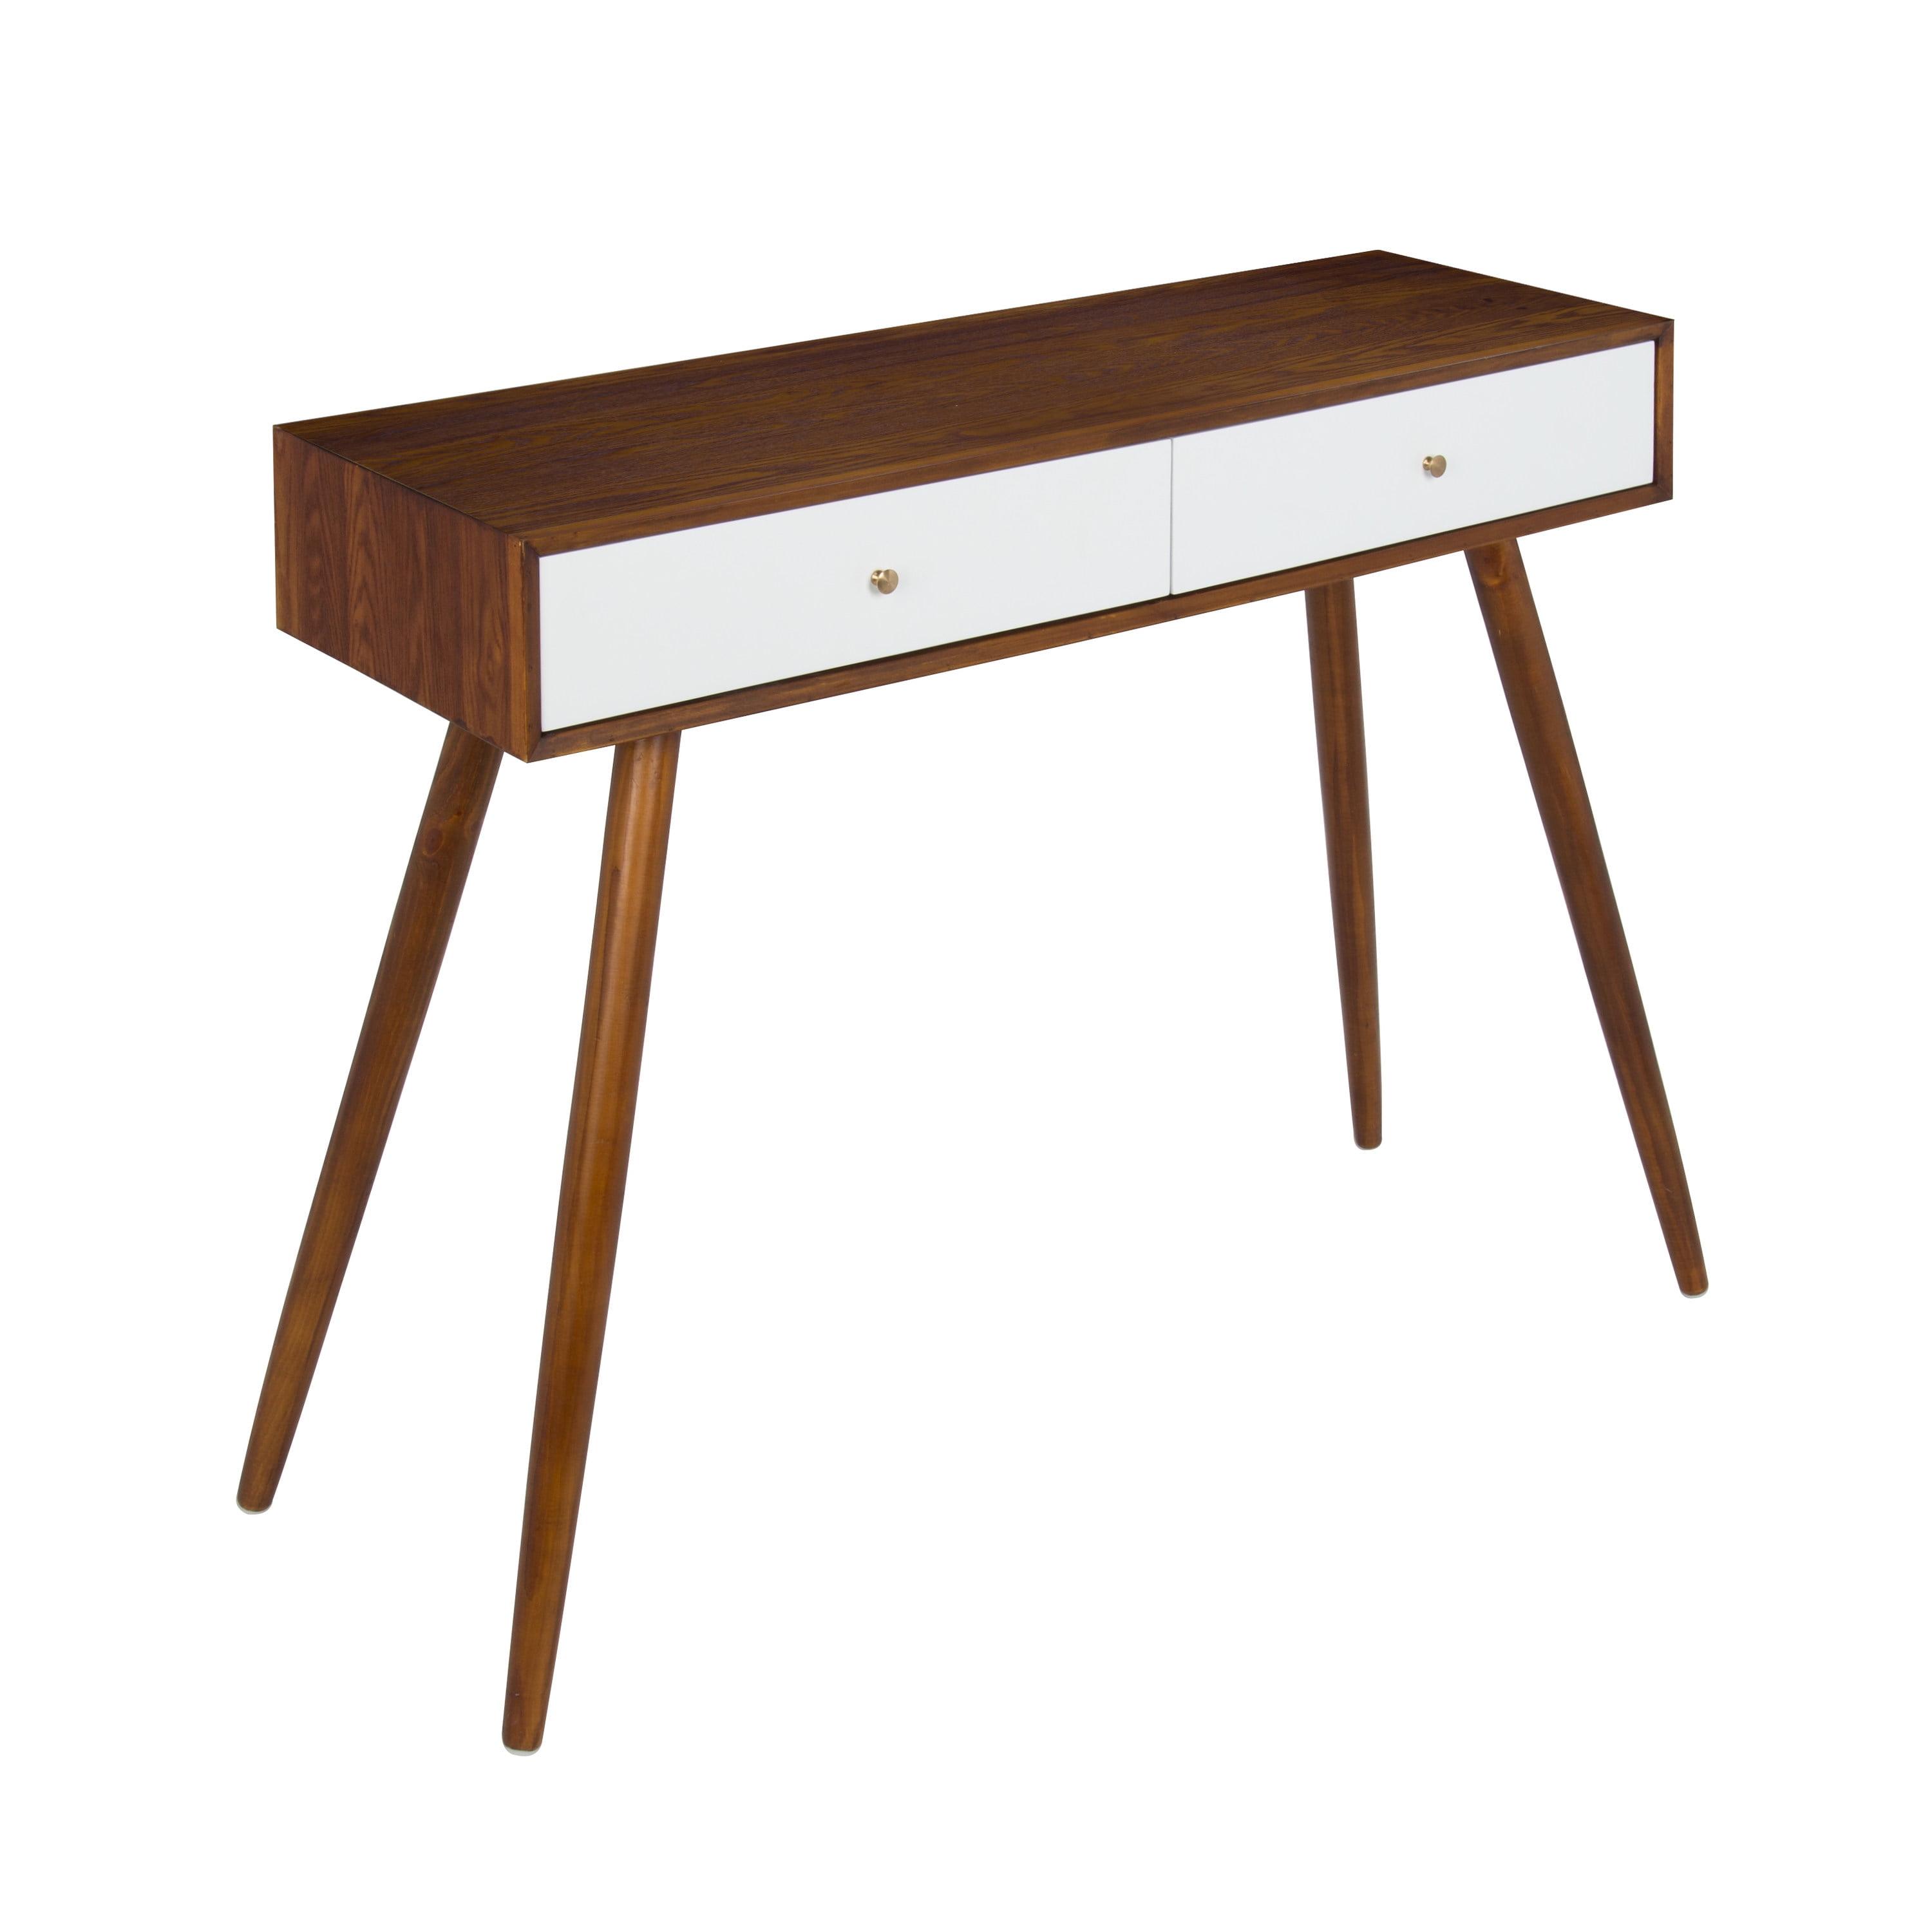 Midcentury Modern Walnut and White Console Table with Brass Accents